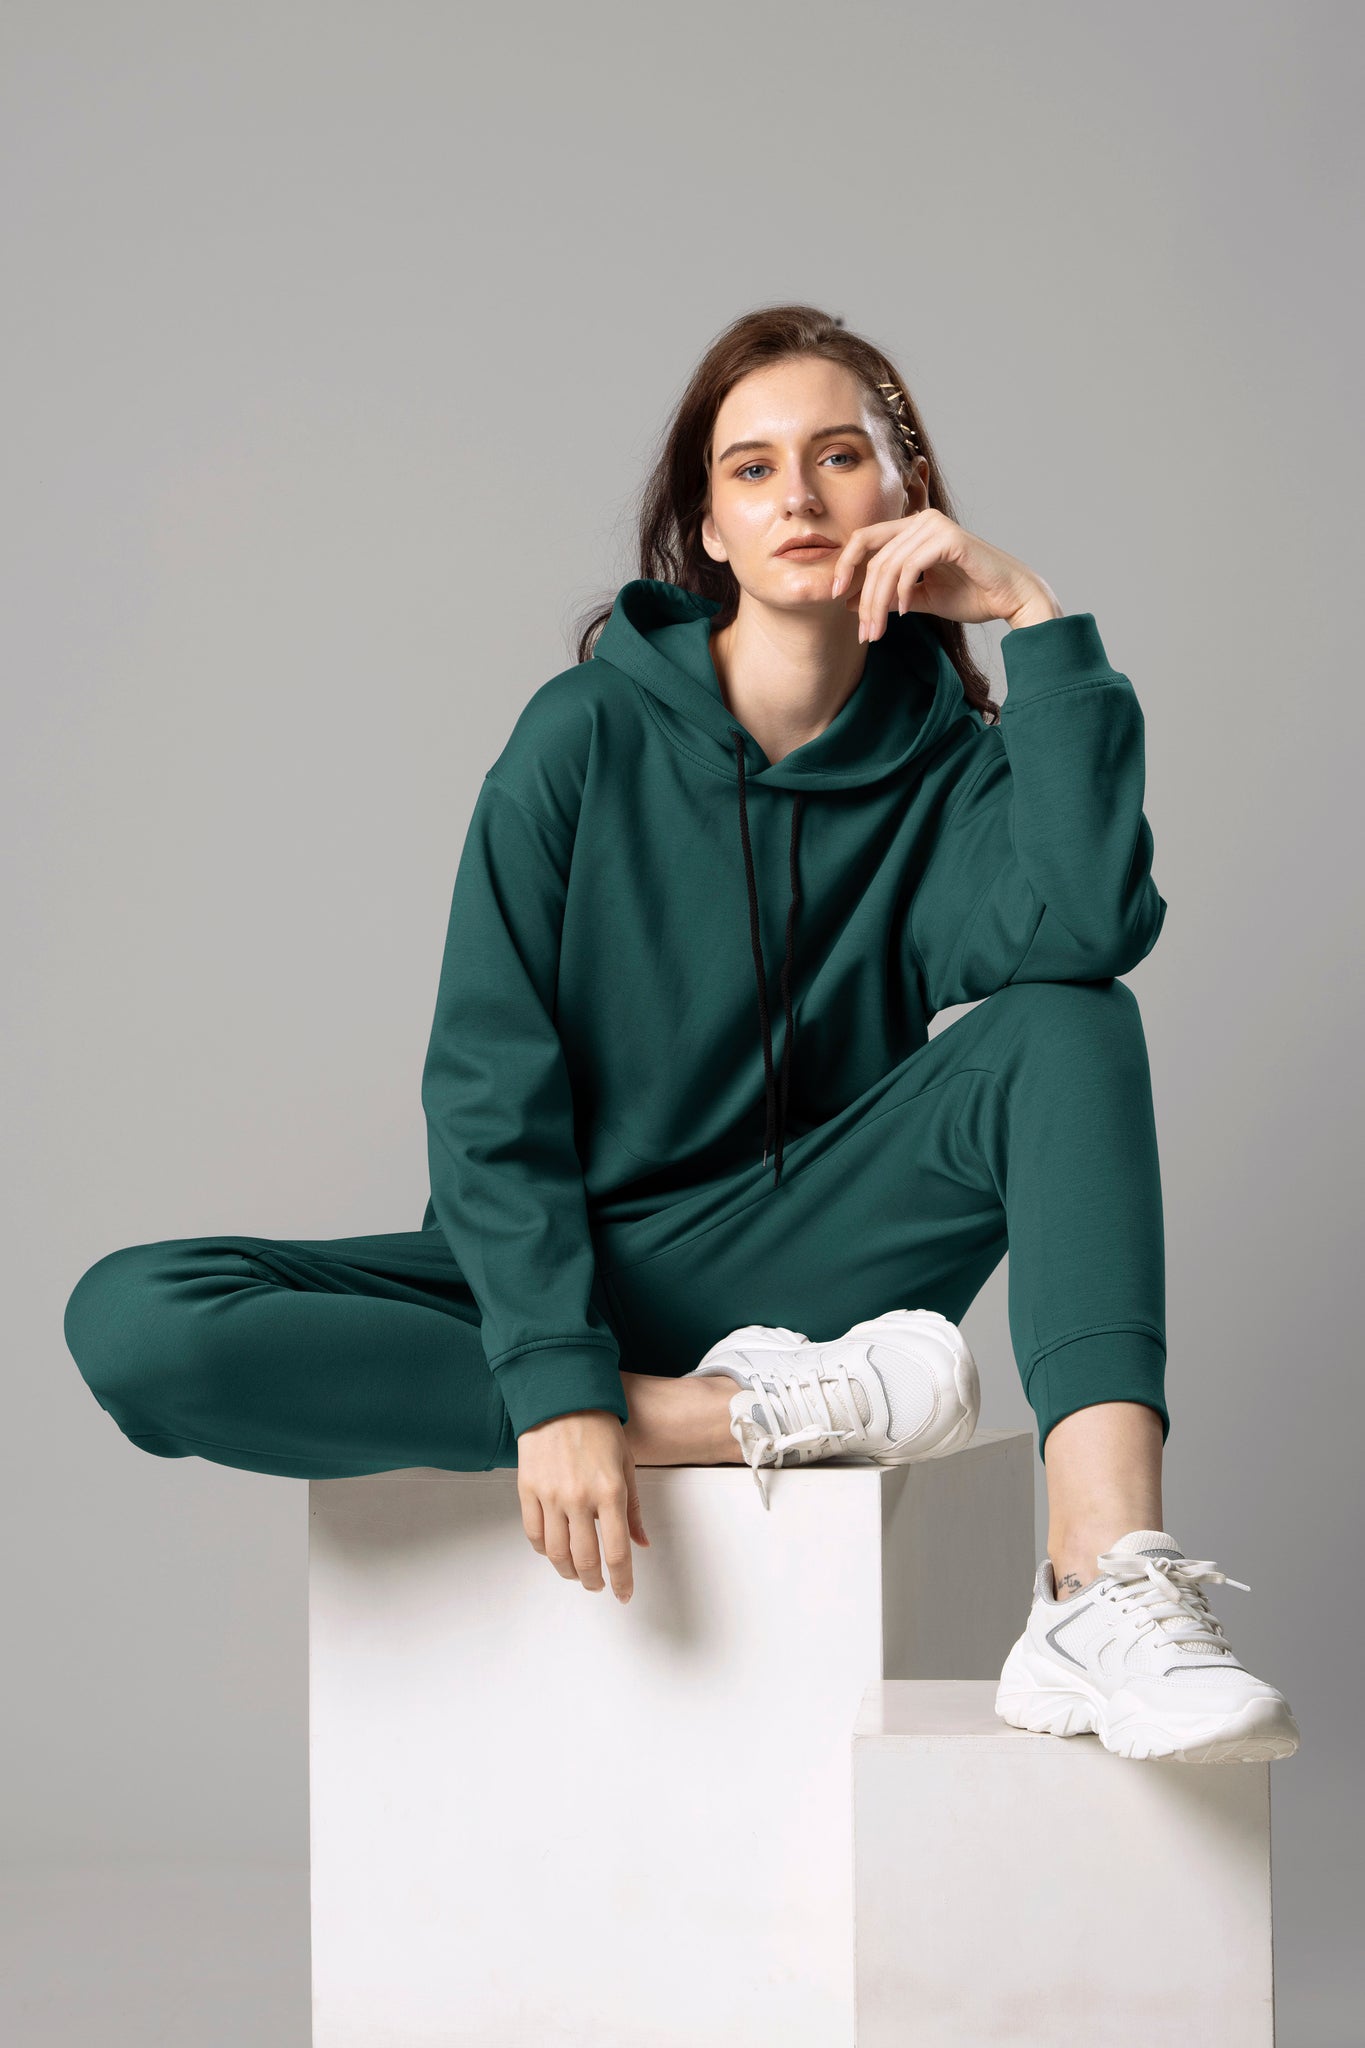 All-Day Comfort Hoodie and Pants Combo for Women